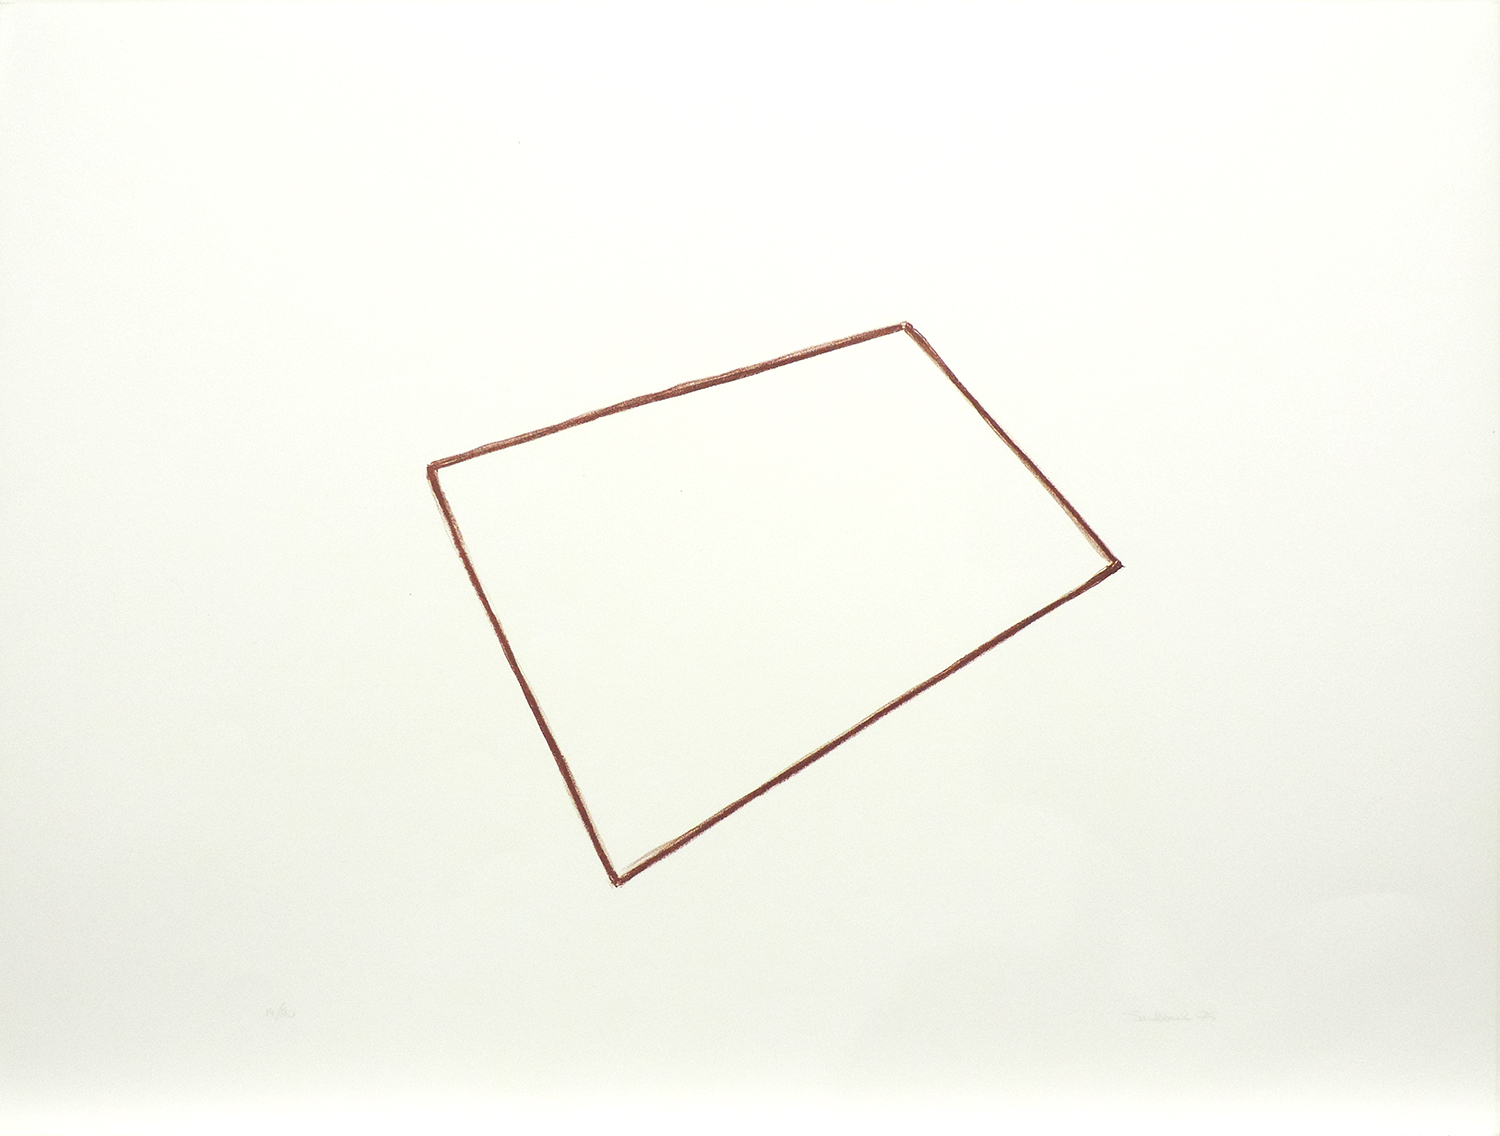 Untitled｜lithograph on handmade paper with cut edge｜48.6 x 64 cm｜1975